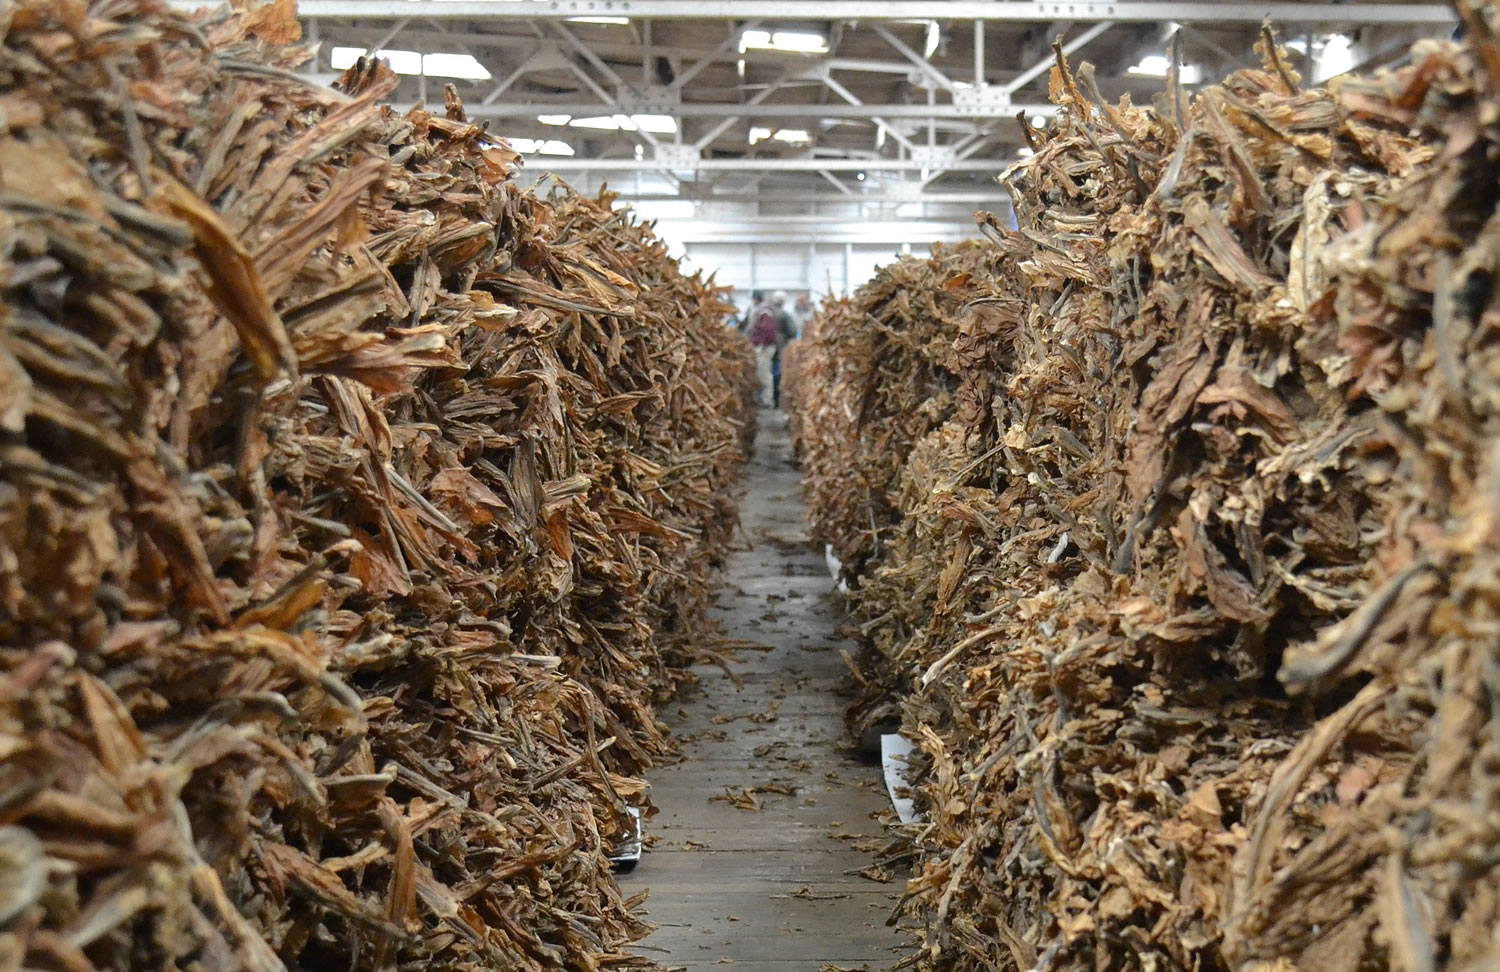 A row of burley tobacco at the tobacco warehouse in Danville, Ky. The Kentucky House has endorsed a statewide smoking ban in public buildings and most workplaces in a landmark vote in a state with historic ties to tobacco.